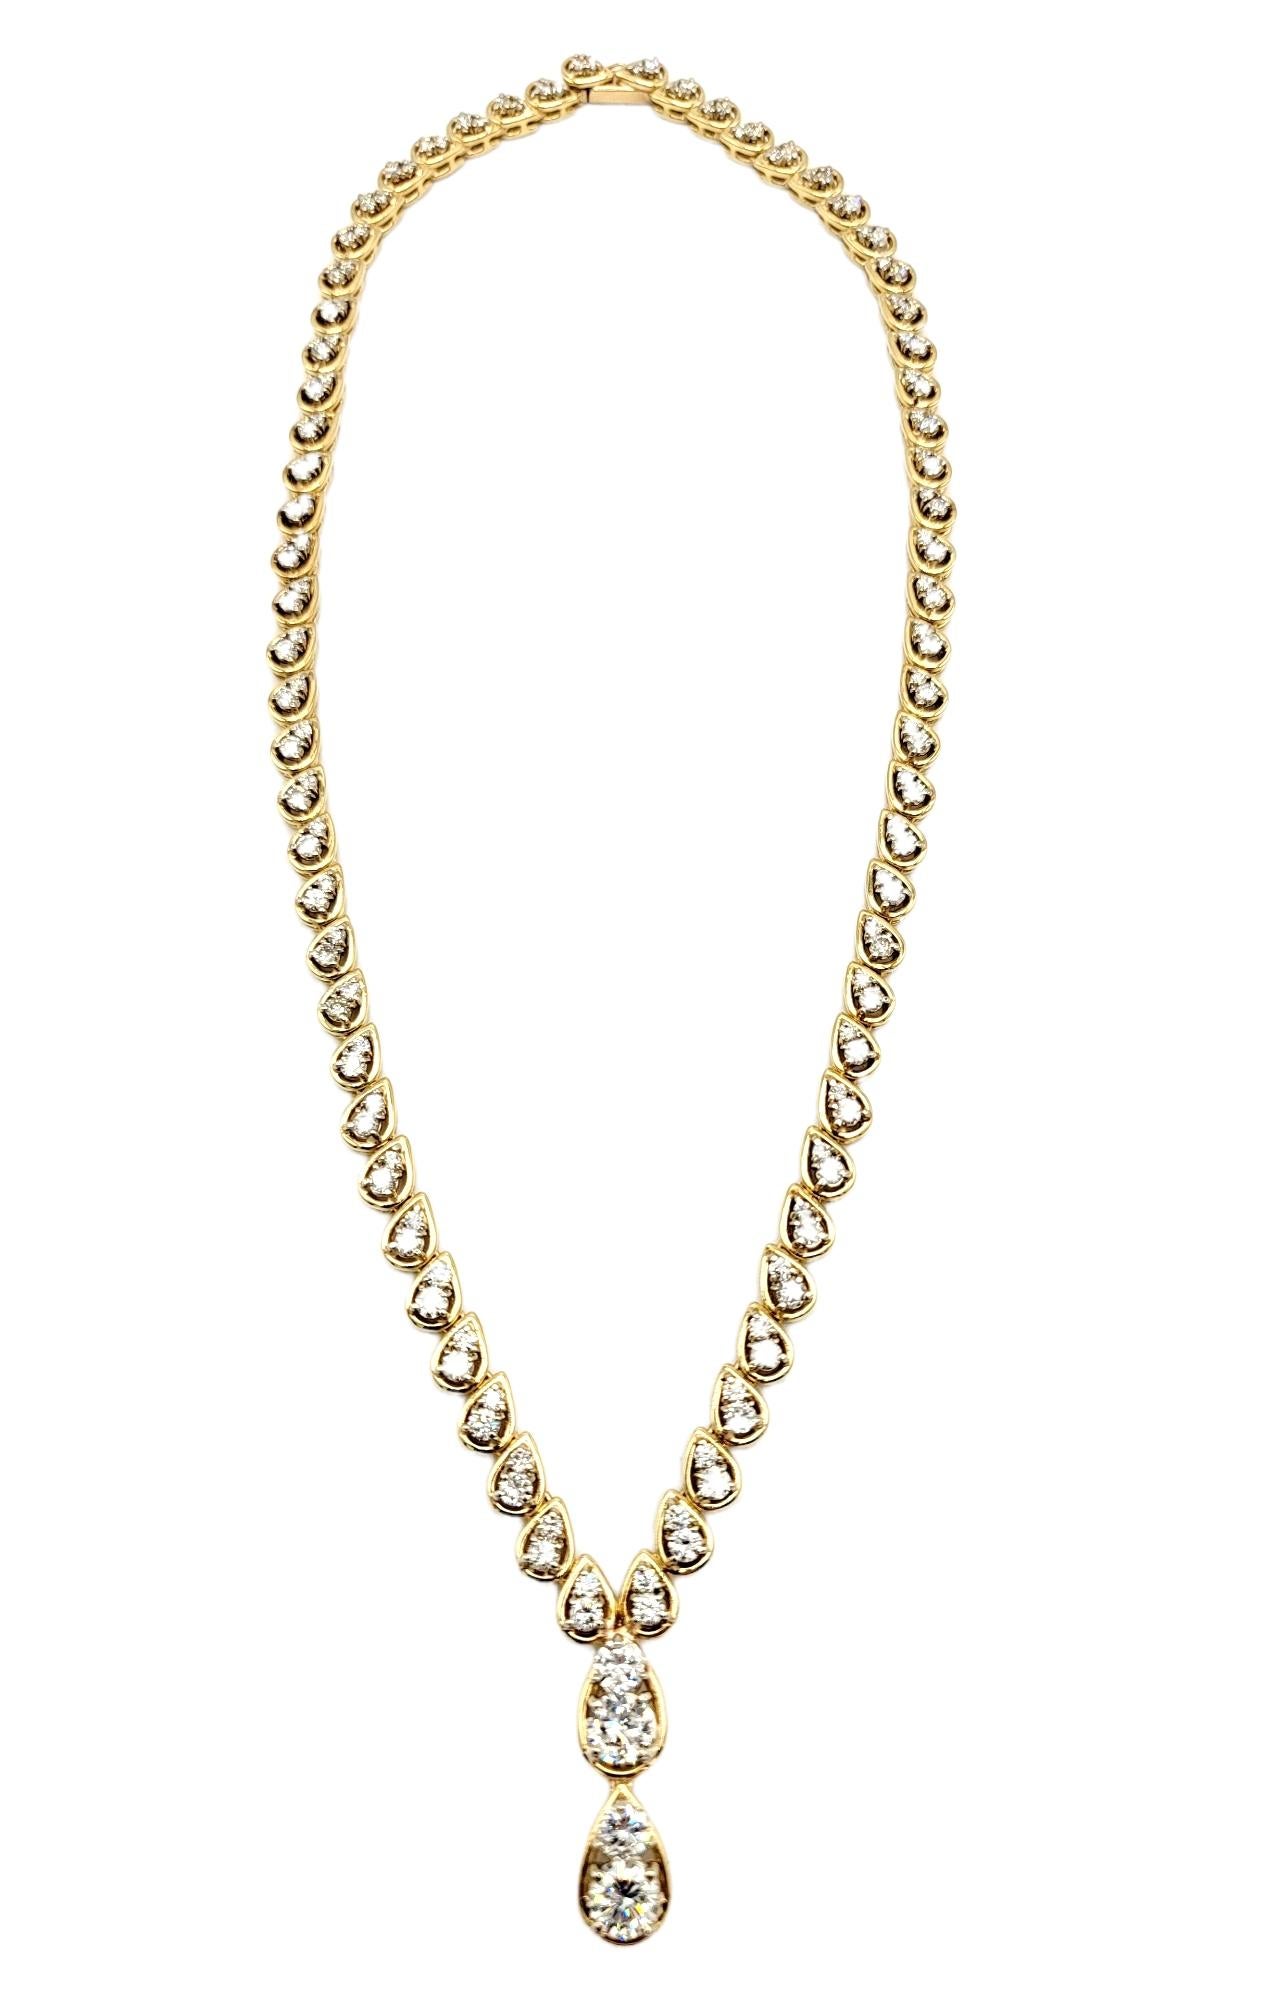 This is an absolutely stunning graduated diamond necklace that will stand the test of time. The elegant yellow gold setting paired with the timeless round diamonds makes this piece a true classic that will never go out of style. This gorgeous